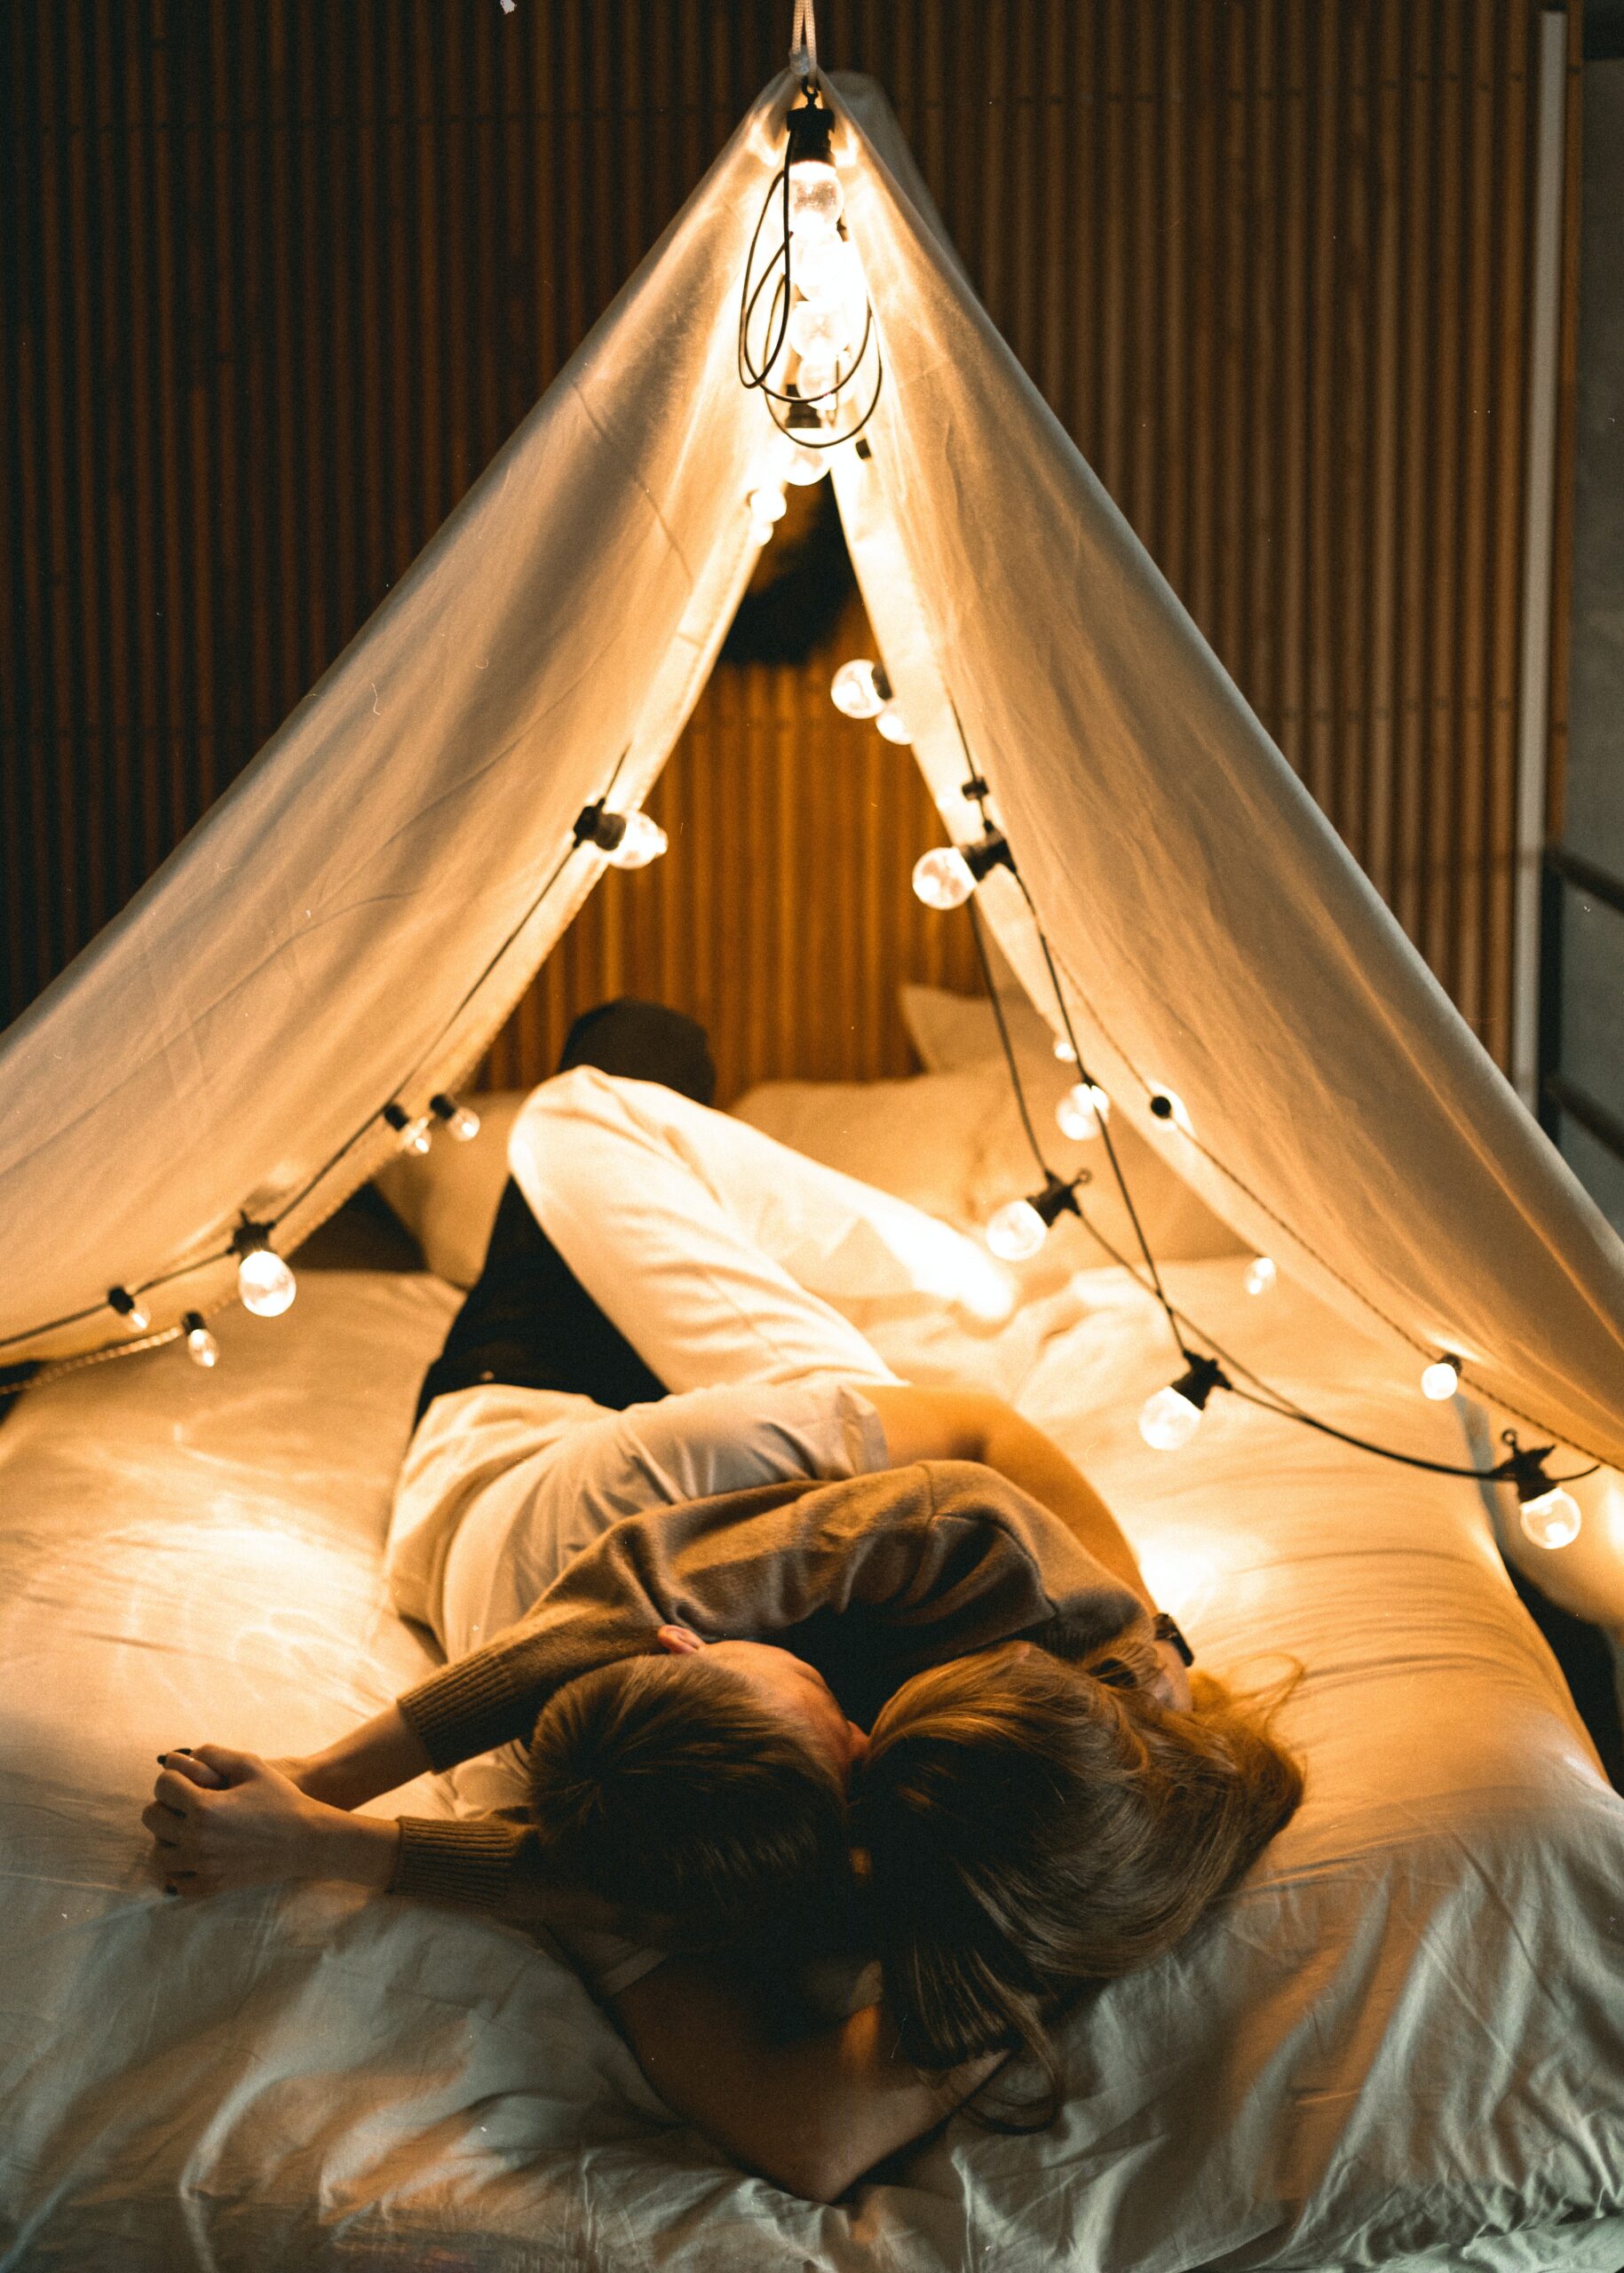 Couple cuddling on bed under canopy